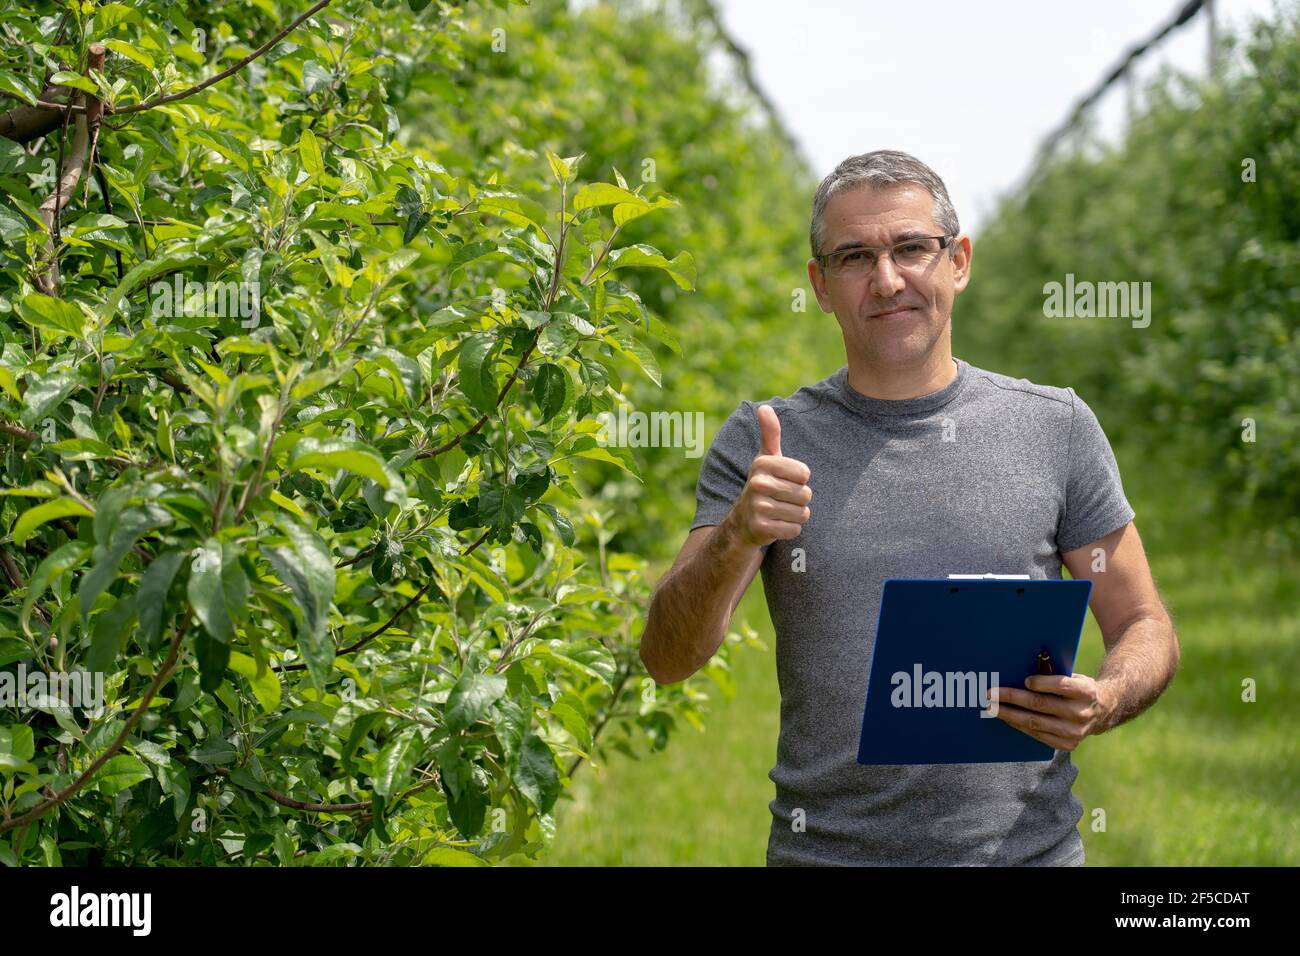 Agronomist or Farmer Standing in Green Orchard, Looking at Camera and Showing Thumb Up. Apple Orchard With Hail Protection Nets. Stock Photo